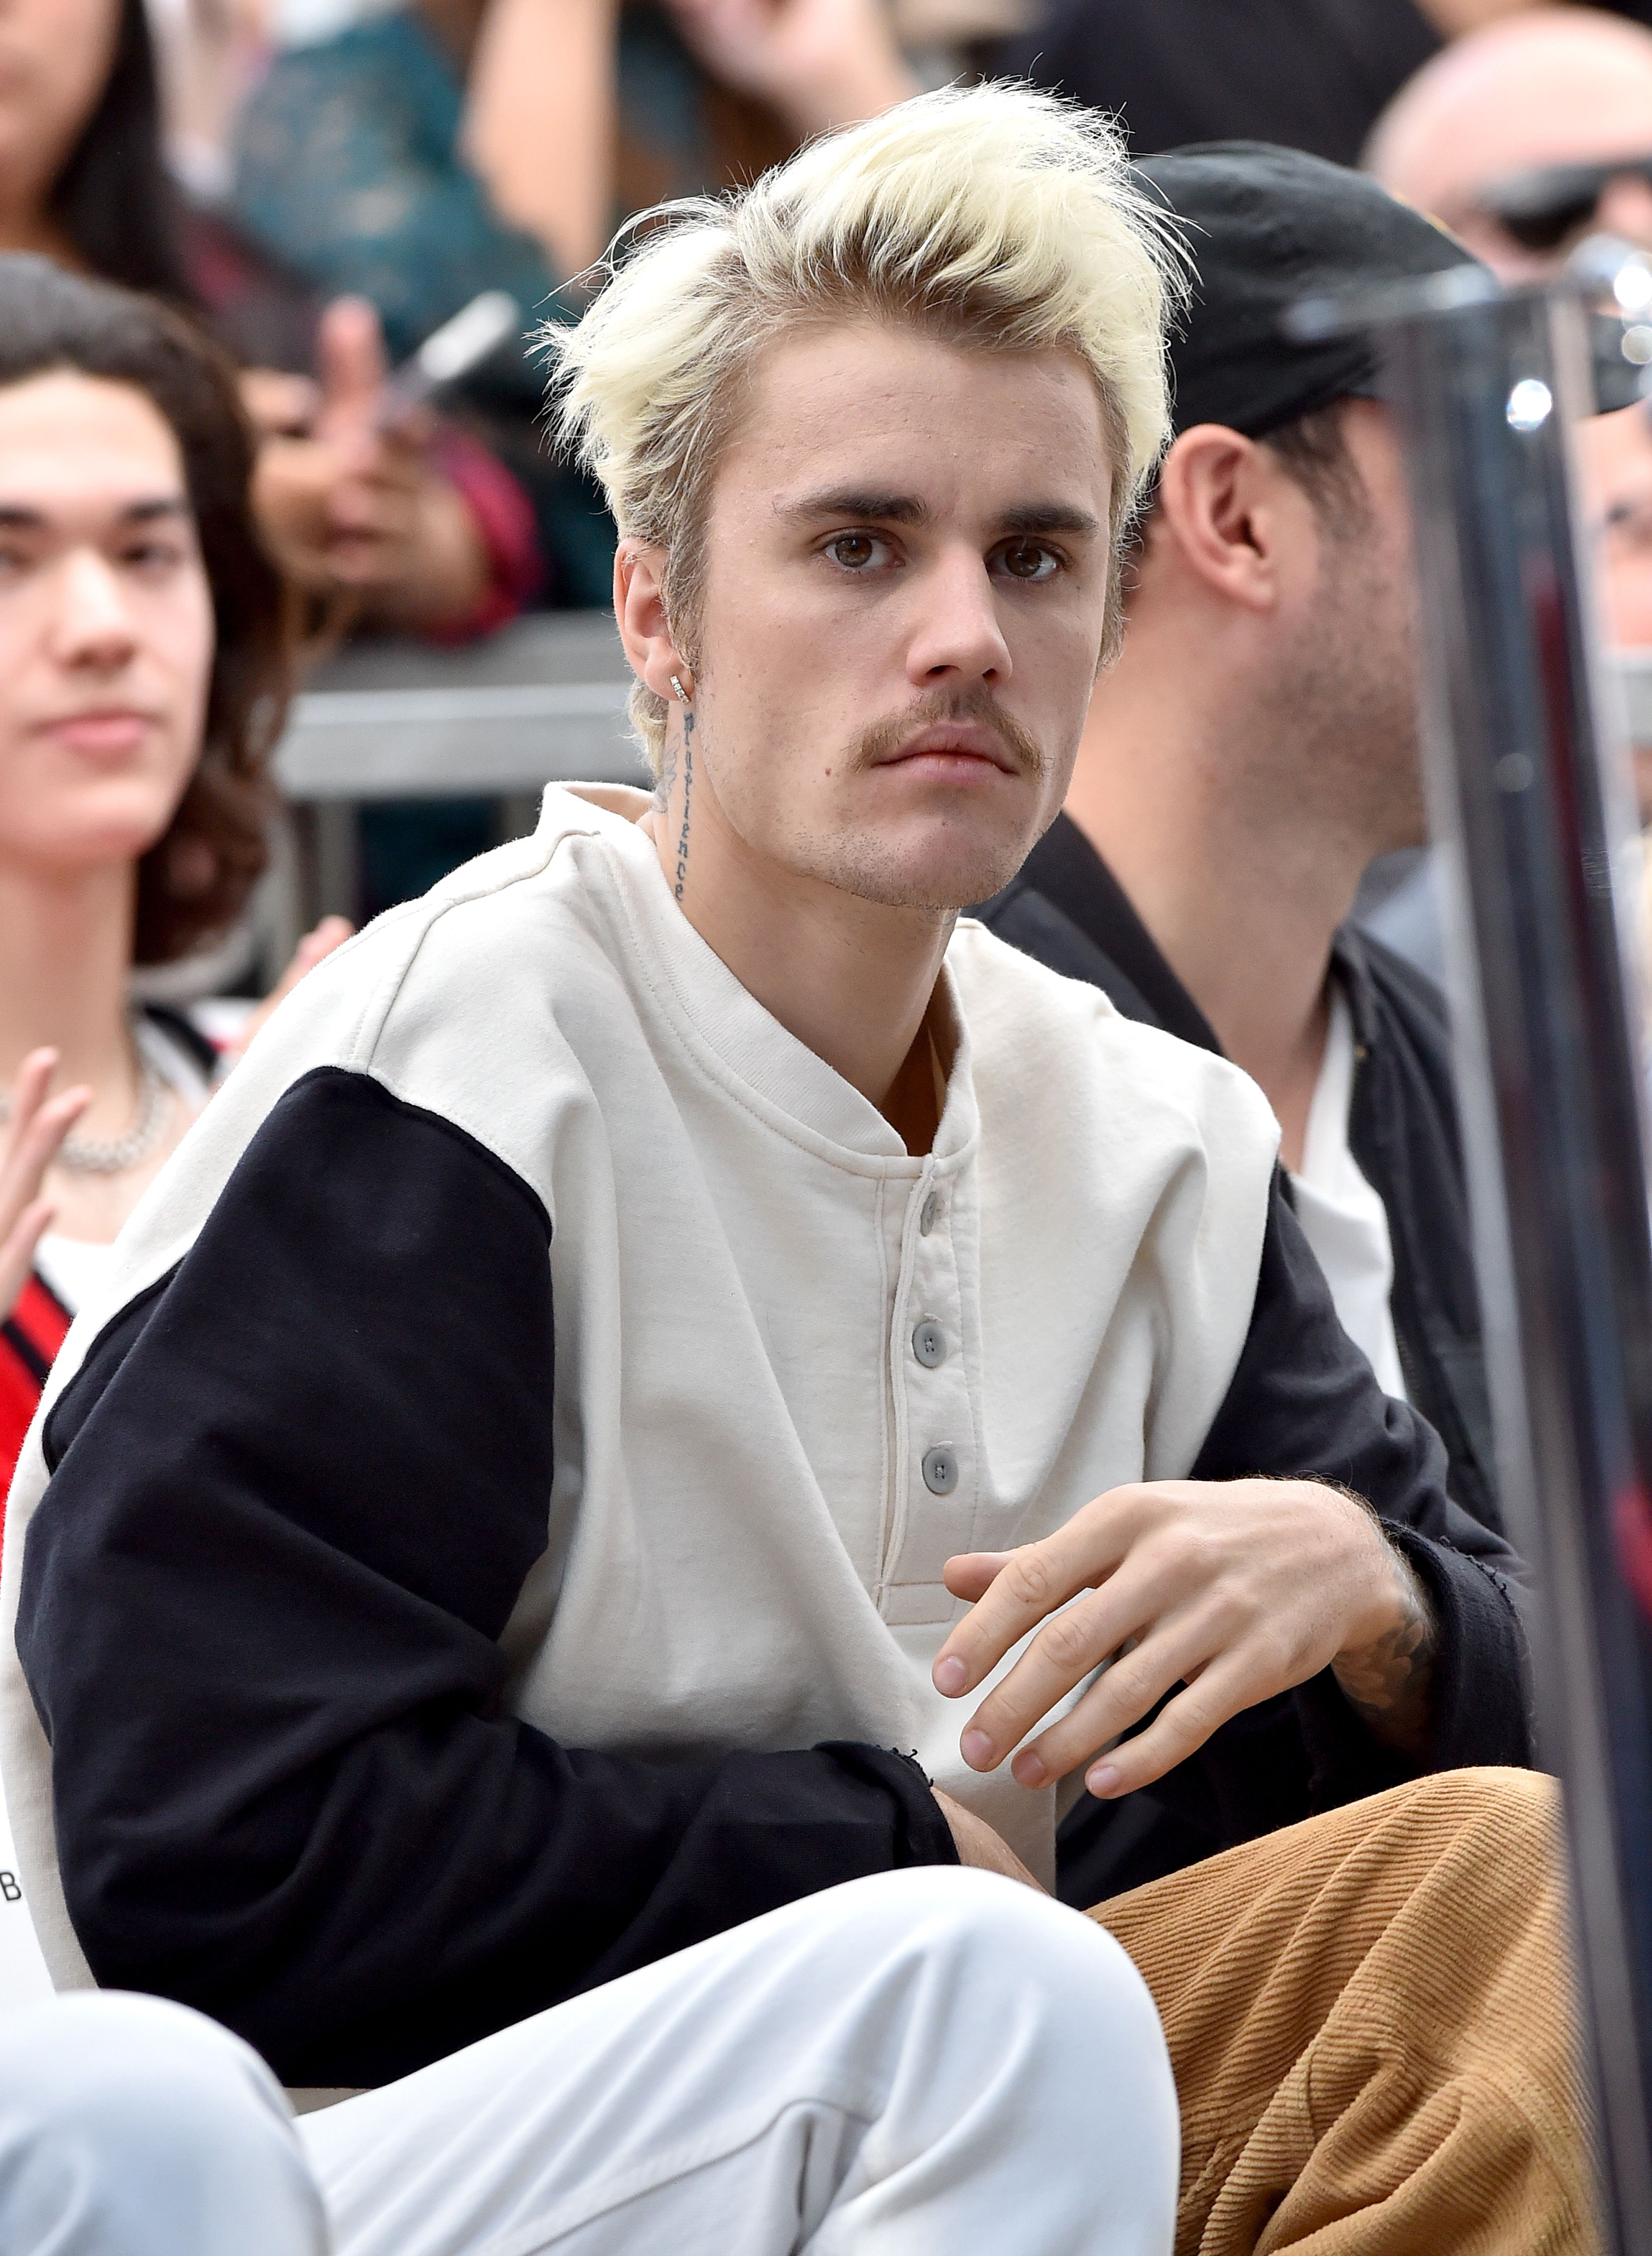 justin-bieber-attends-the-ceremony-honoring-sir-lucian-news-photo-1592832230.jpg